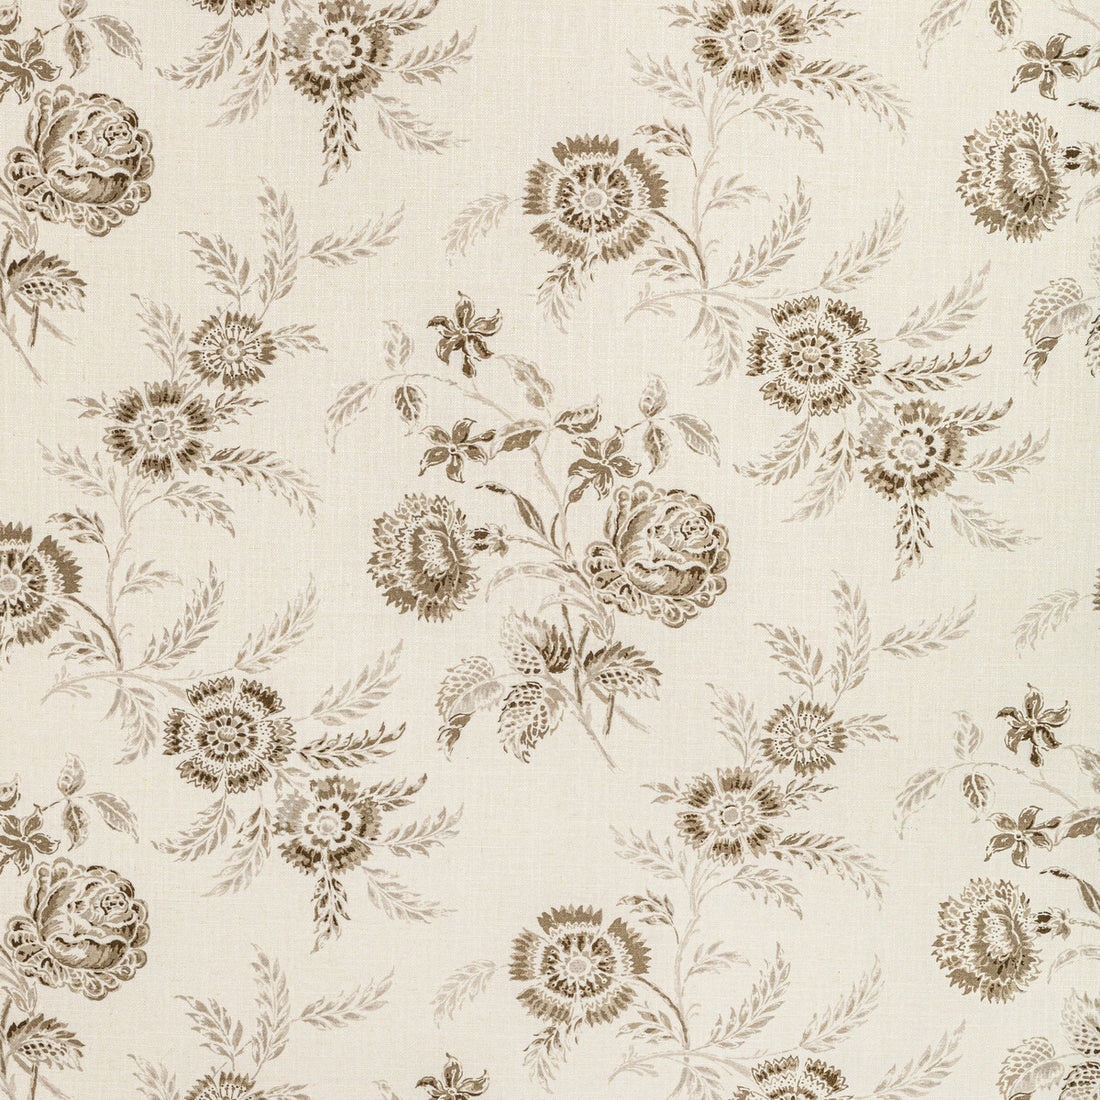 Boutique Floral fabric in sand color - pattern 2022101.16.0 - by Lee Jofa in the Sarah Bartholomew collection